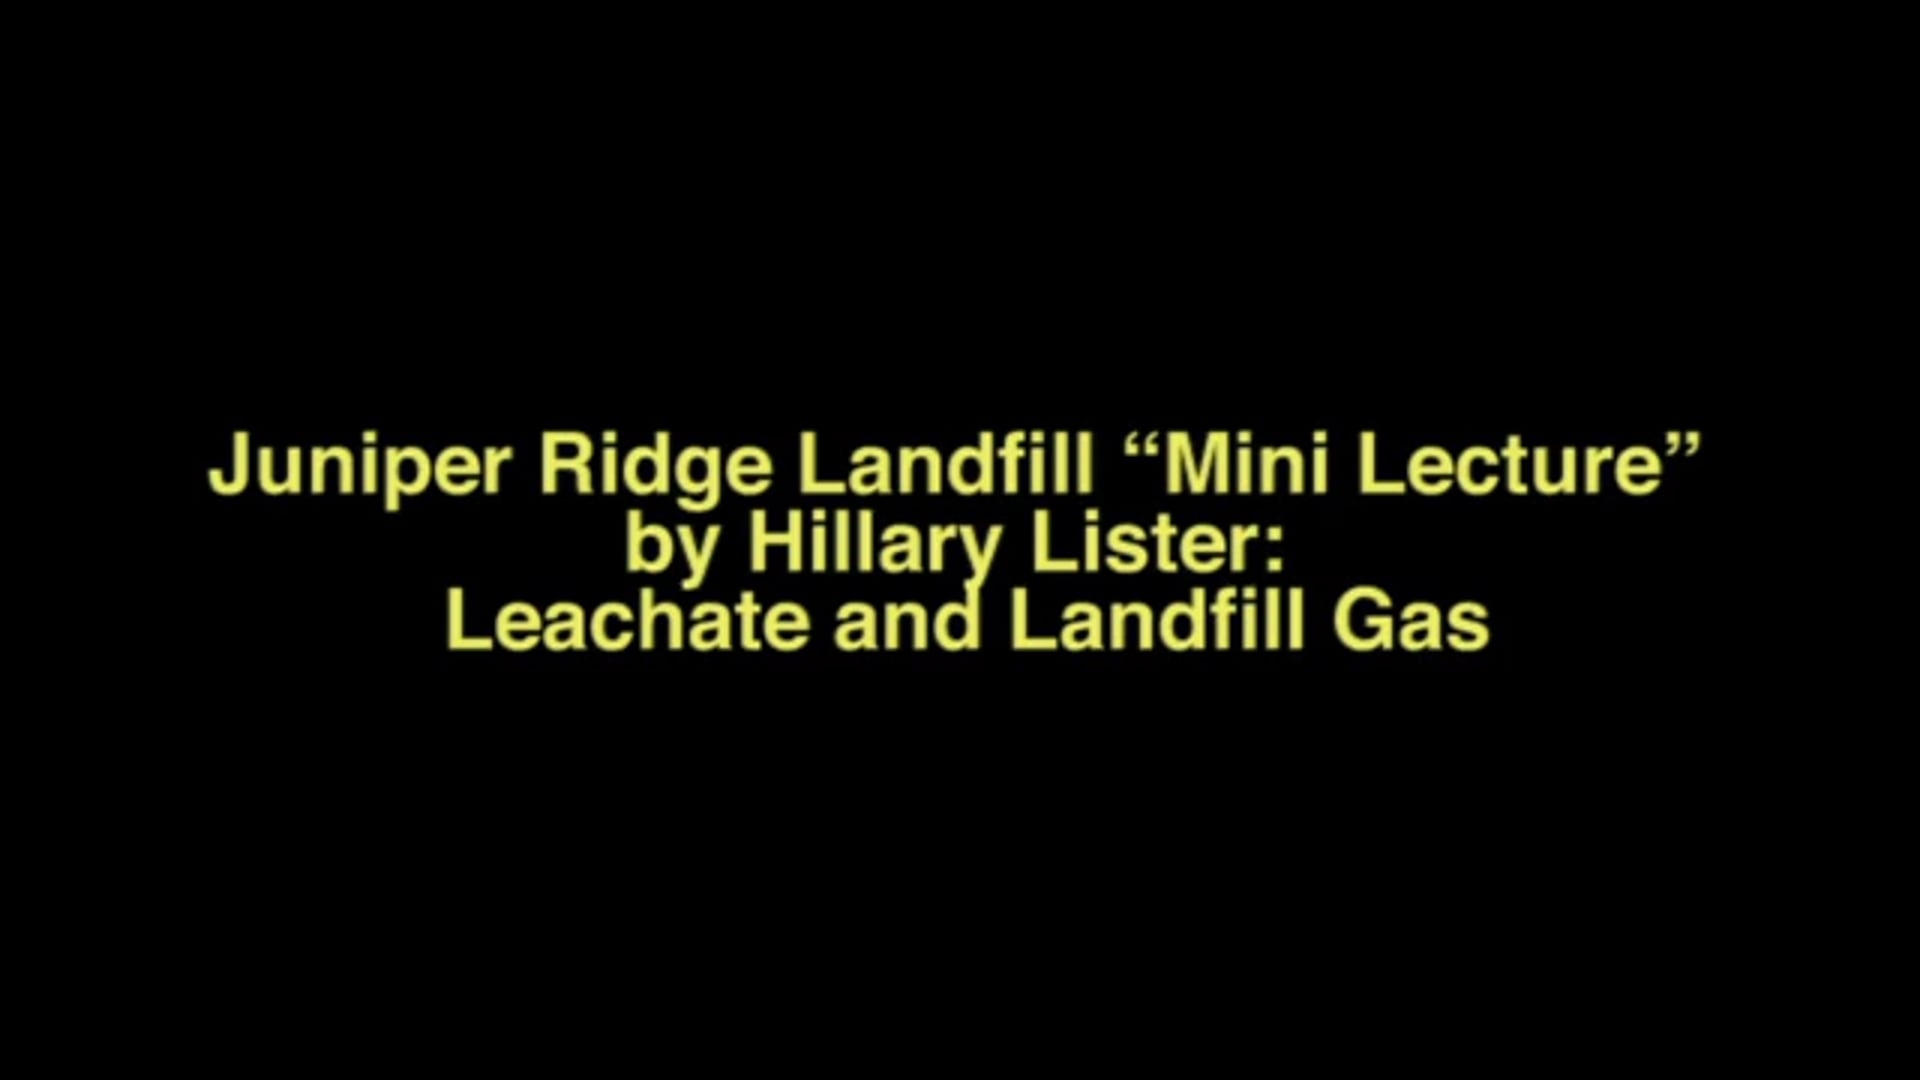 Leachate and Landfill Gas: Juniper Ridge Landfill Mini Lecture by Hillary Lister